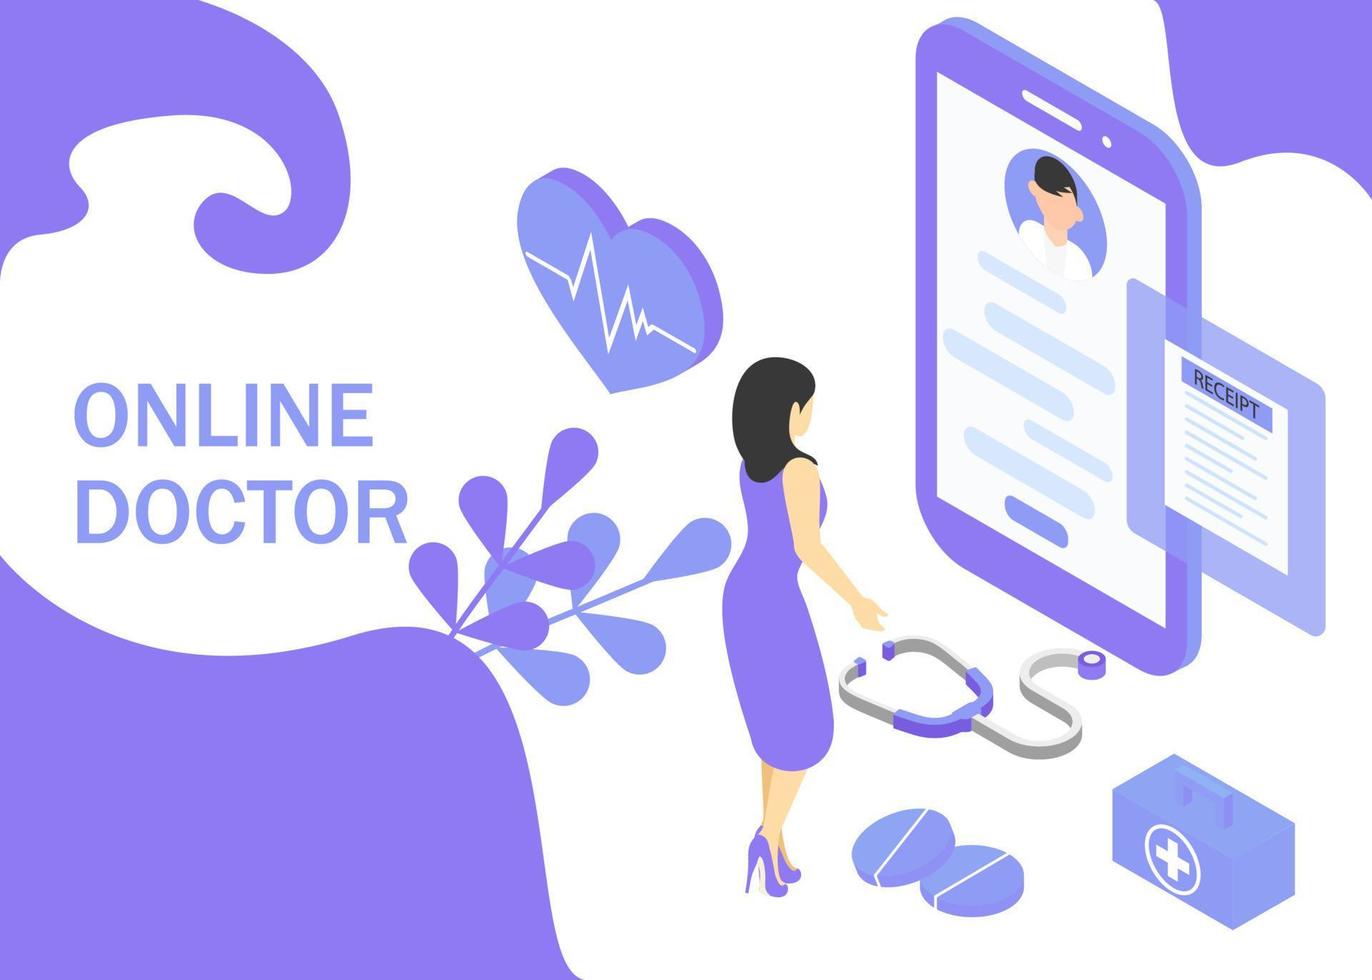 Doctor online concept. Isometric projection. Modern style in purple color. Vector illustration. EPS 10